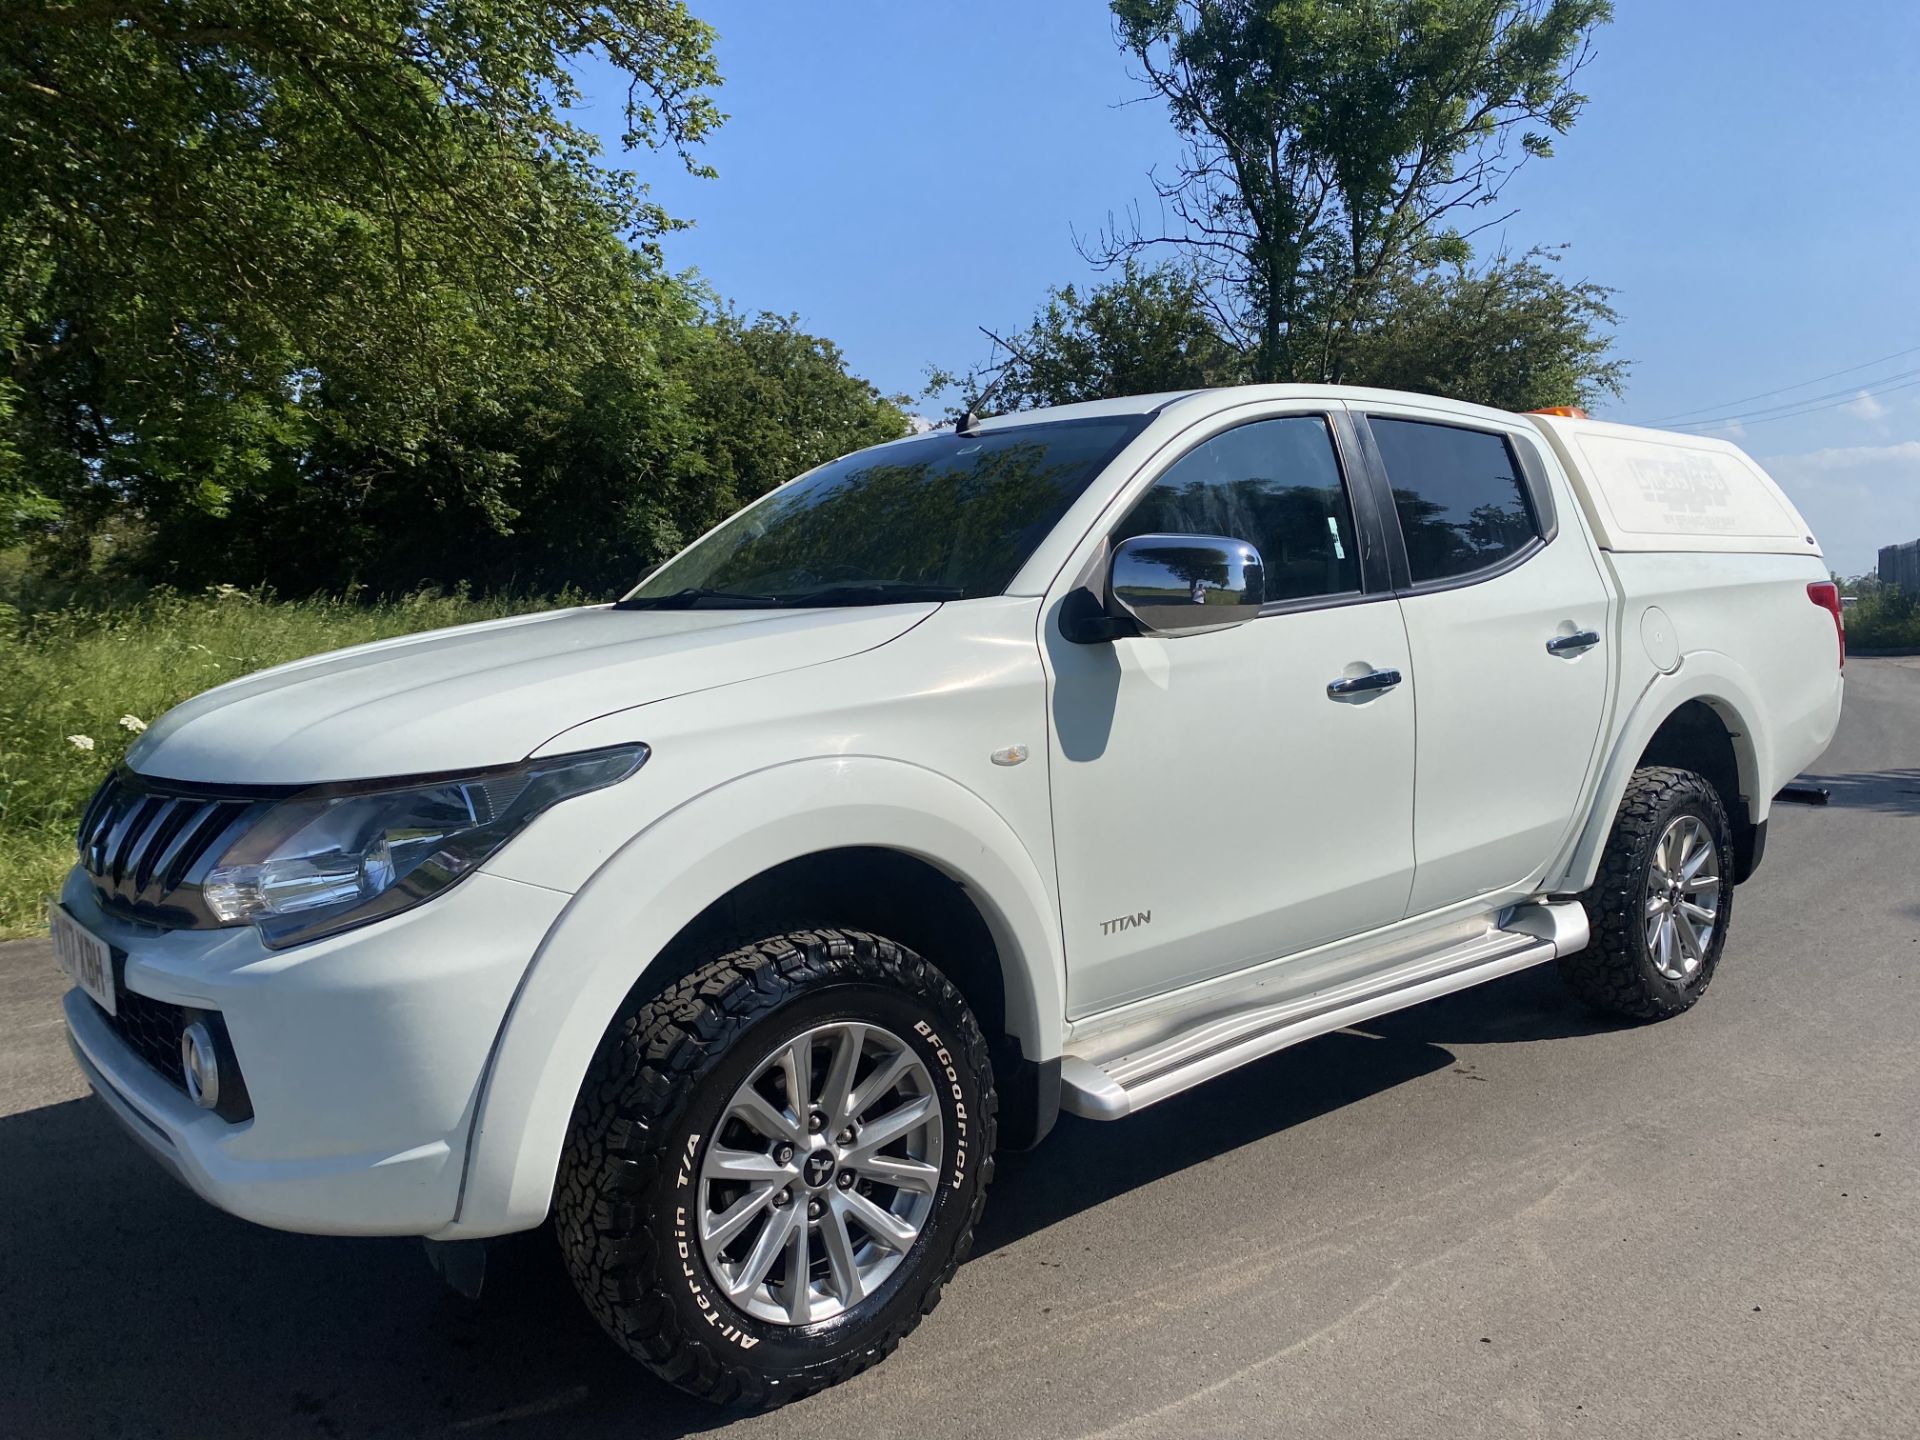 (On Sale) MITSUBISHI L200 "TITAN" D/CAB PICK UP (17 REG) NEW SHAPE - 1 OWNER - REAR CANOPY - AIR CON - Image 4 of 28